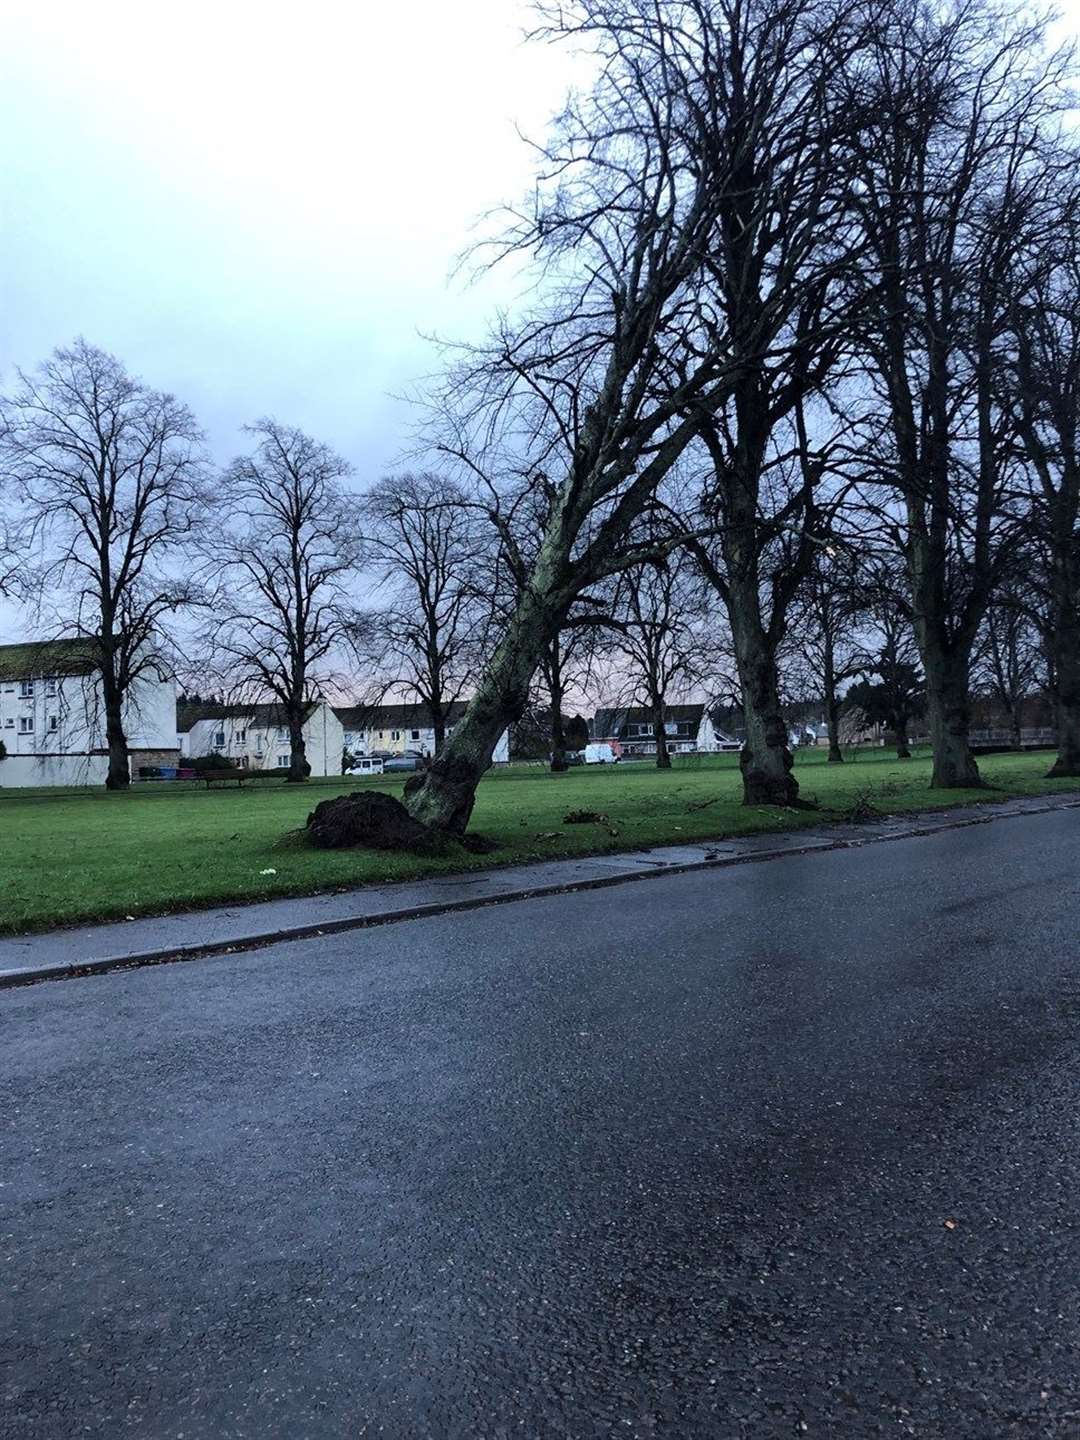 Damage in Forres following Storm Arwen last Friday. Image courtesy of Moray Council.